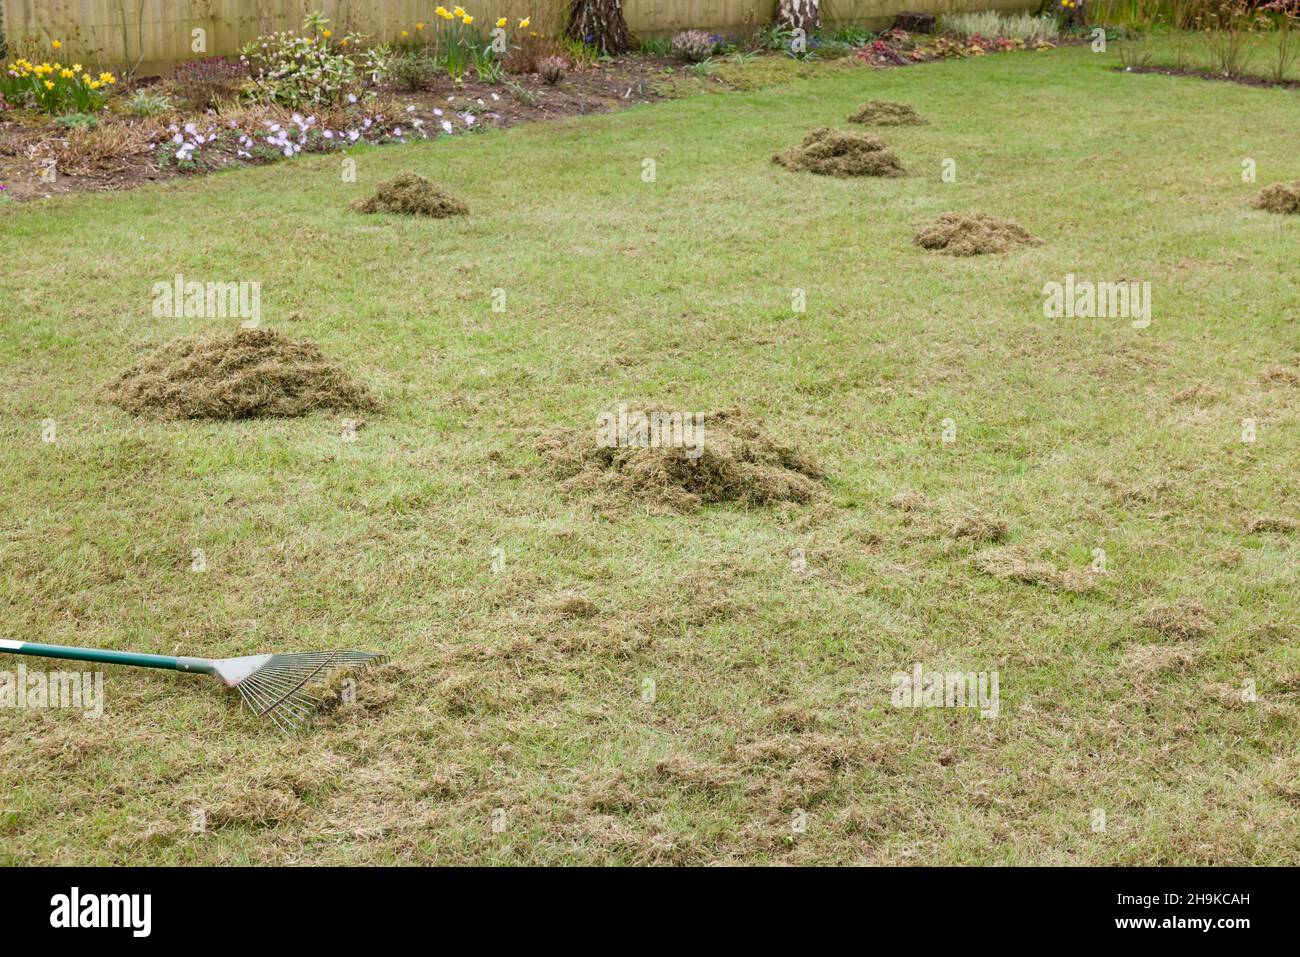 Raking lawn to remove moss from grass after scarifying in a UK garden Stock Photo